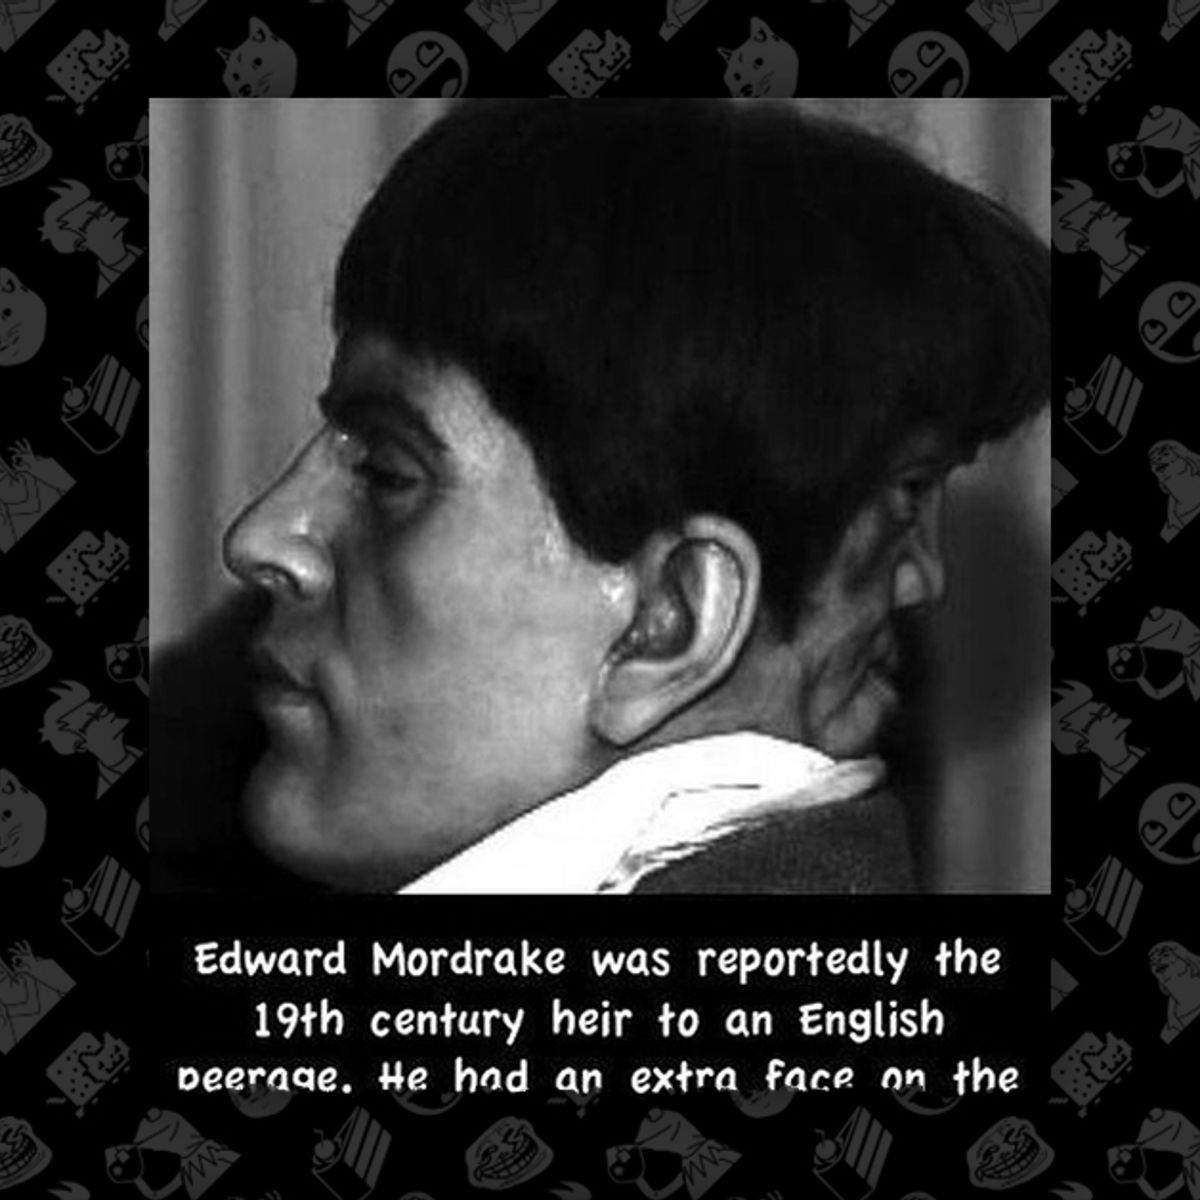 Edward Mordrake, the Man with Two Faces